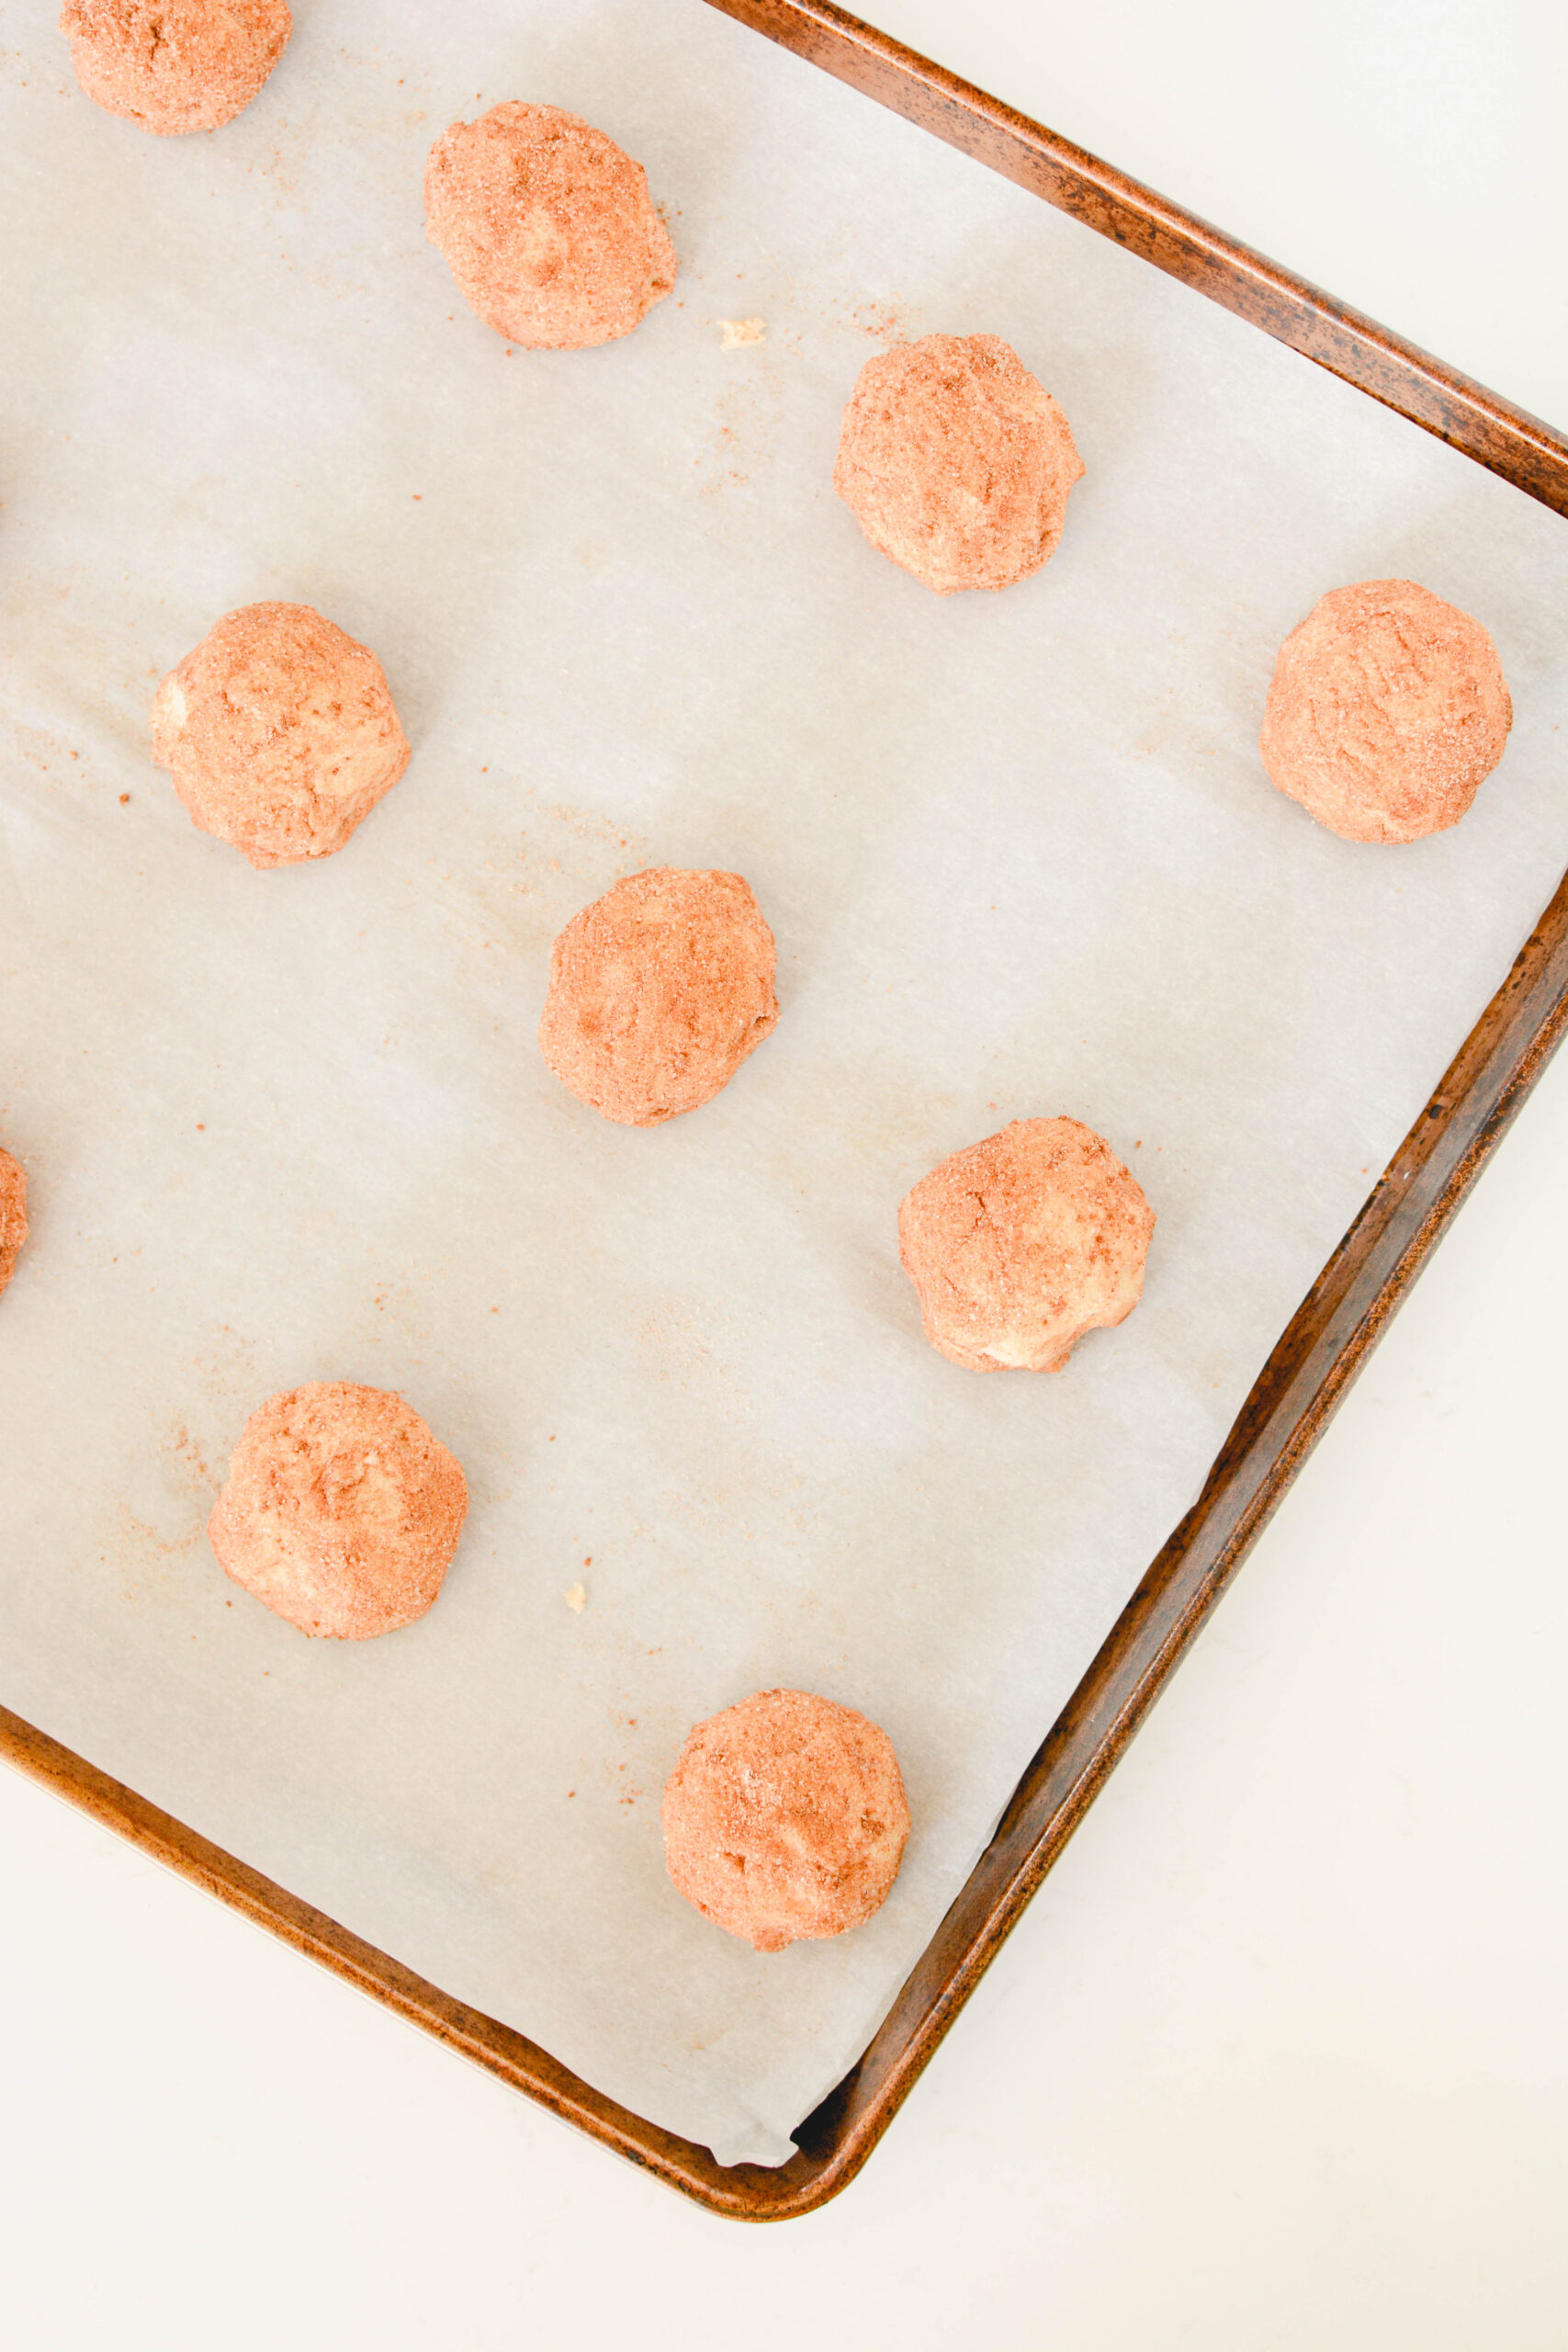 Overhead shot of cookie dough balls on lined baking sheet for Snickerdoodles.